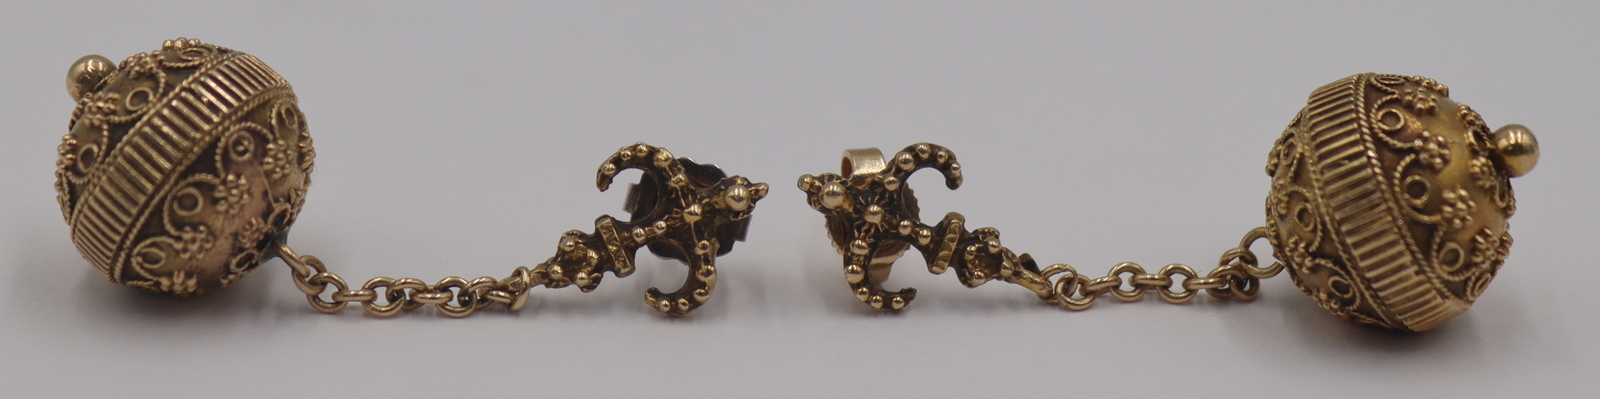 JEWELRY PAIR OF ETRUSCAN REVIVAL